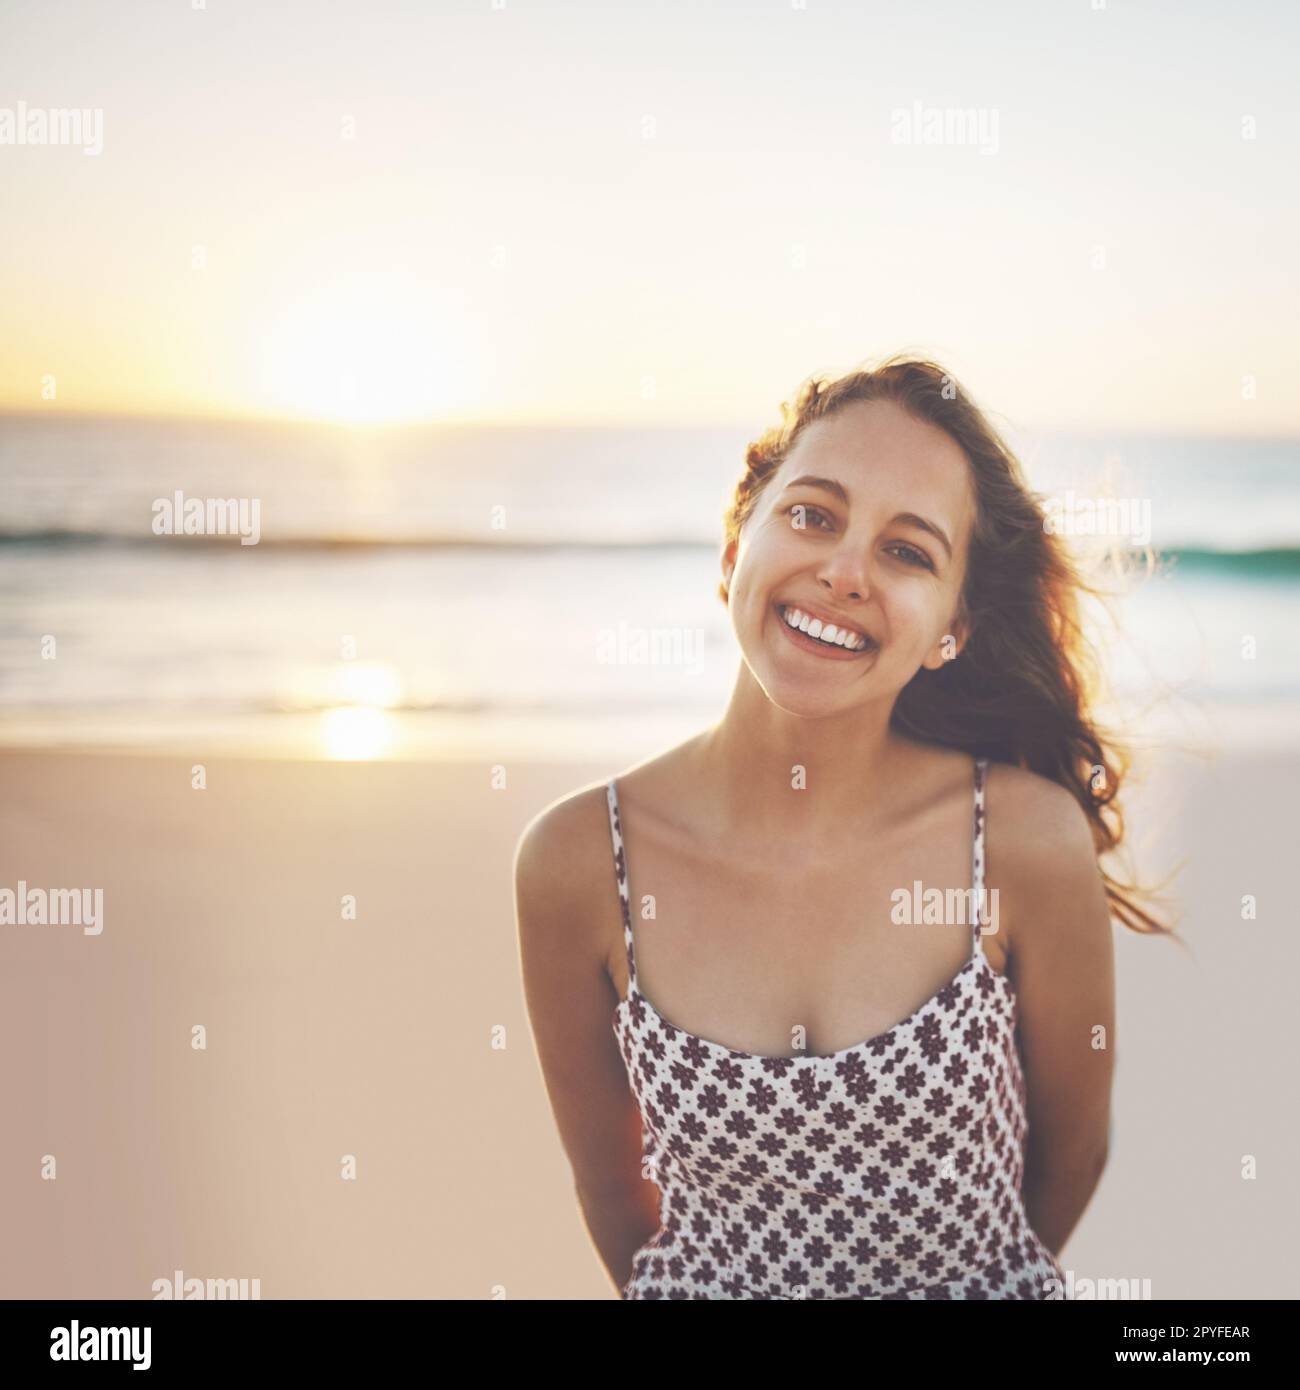 Youll find nothing but good vibes by the shore. a young woman enjoying her day at the beach. Stock Photo